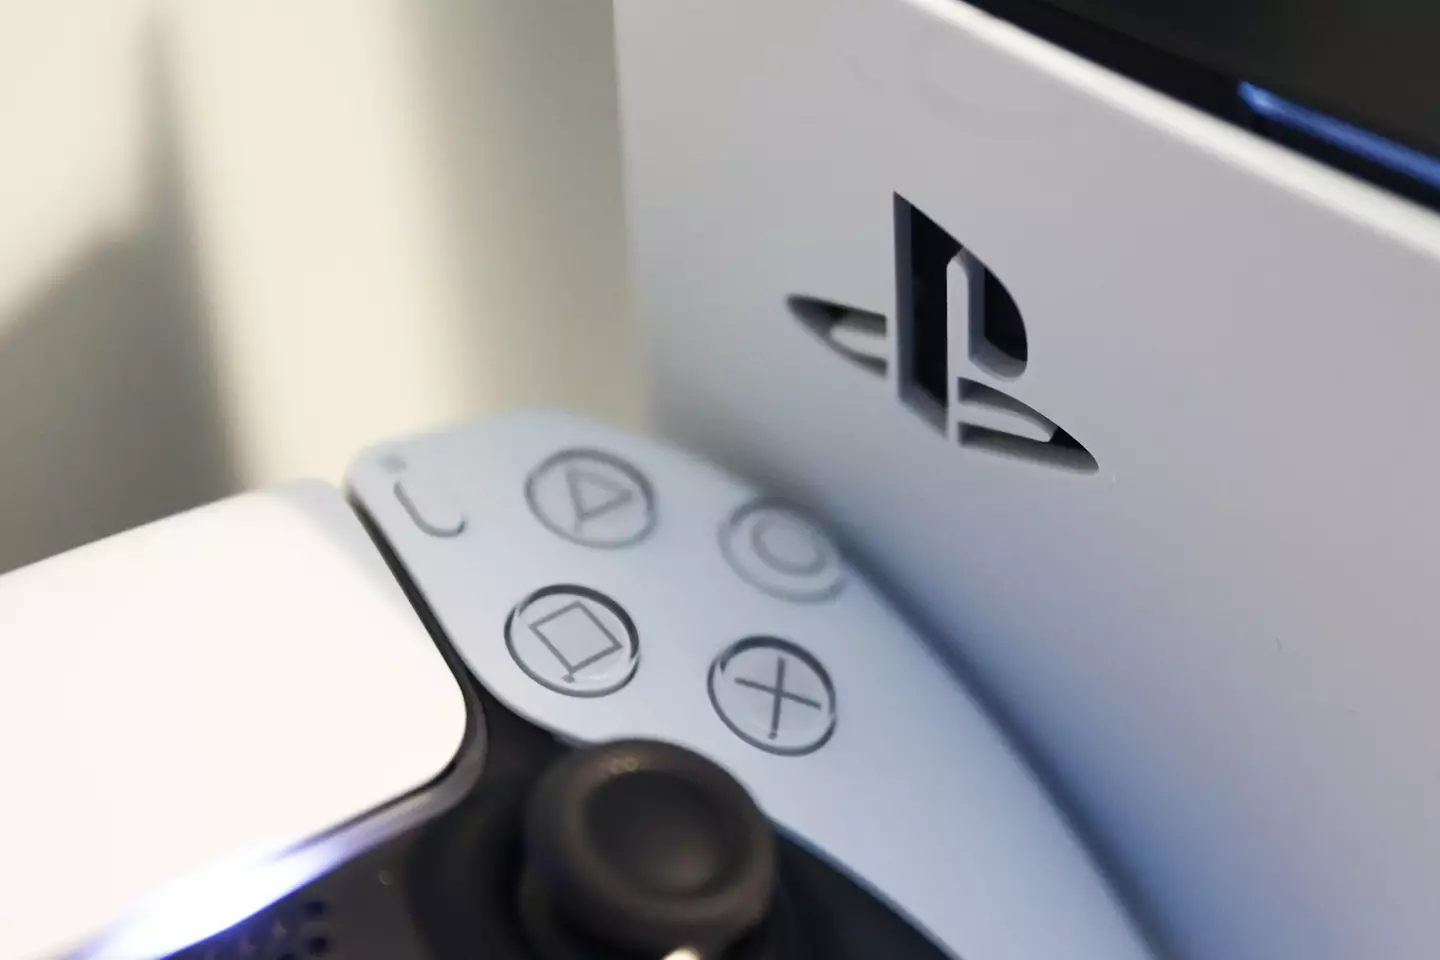 The PS5 released in 2020.